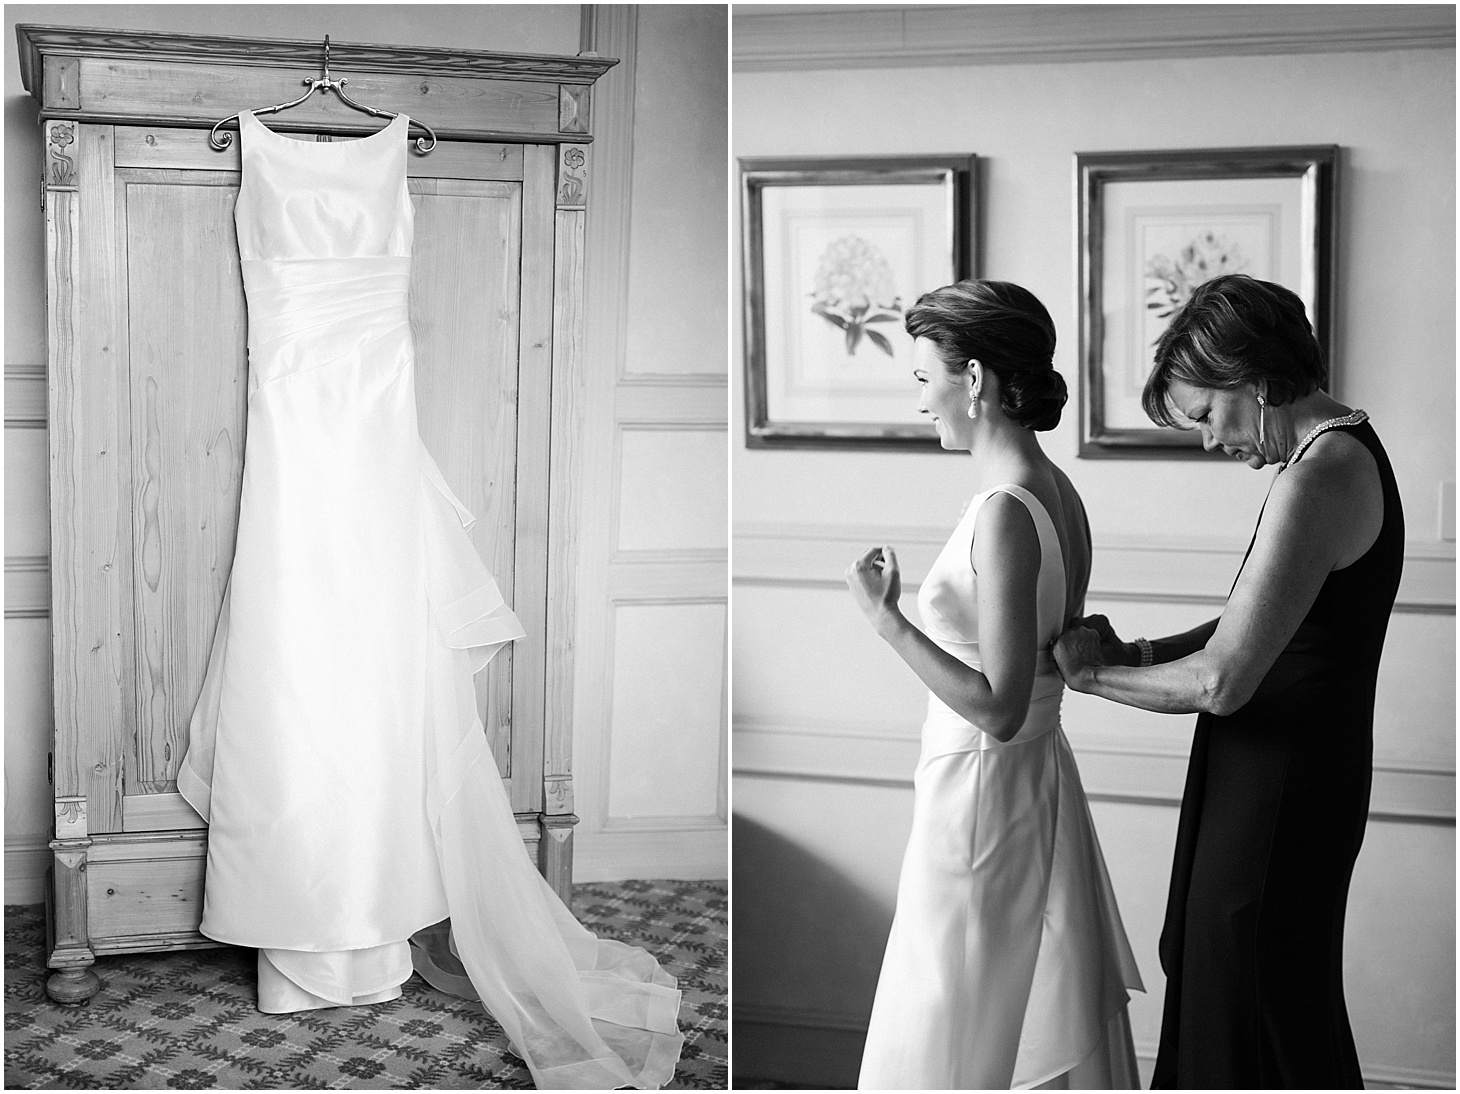 Bride Getting Ready at Columbia Country Club | Le Spose di Giò Wedding Gown | Wedding Ceremony at Cathedral of St. Matthew the Apostle | Classy October Wedding in Washington, D.C. | Sarah Bradshaw Photography